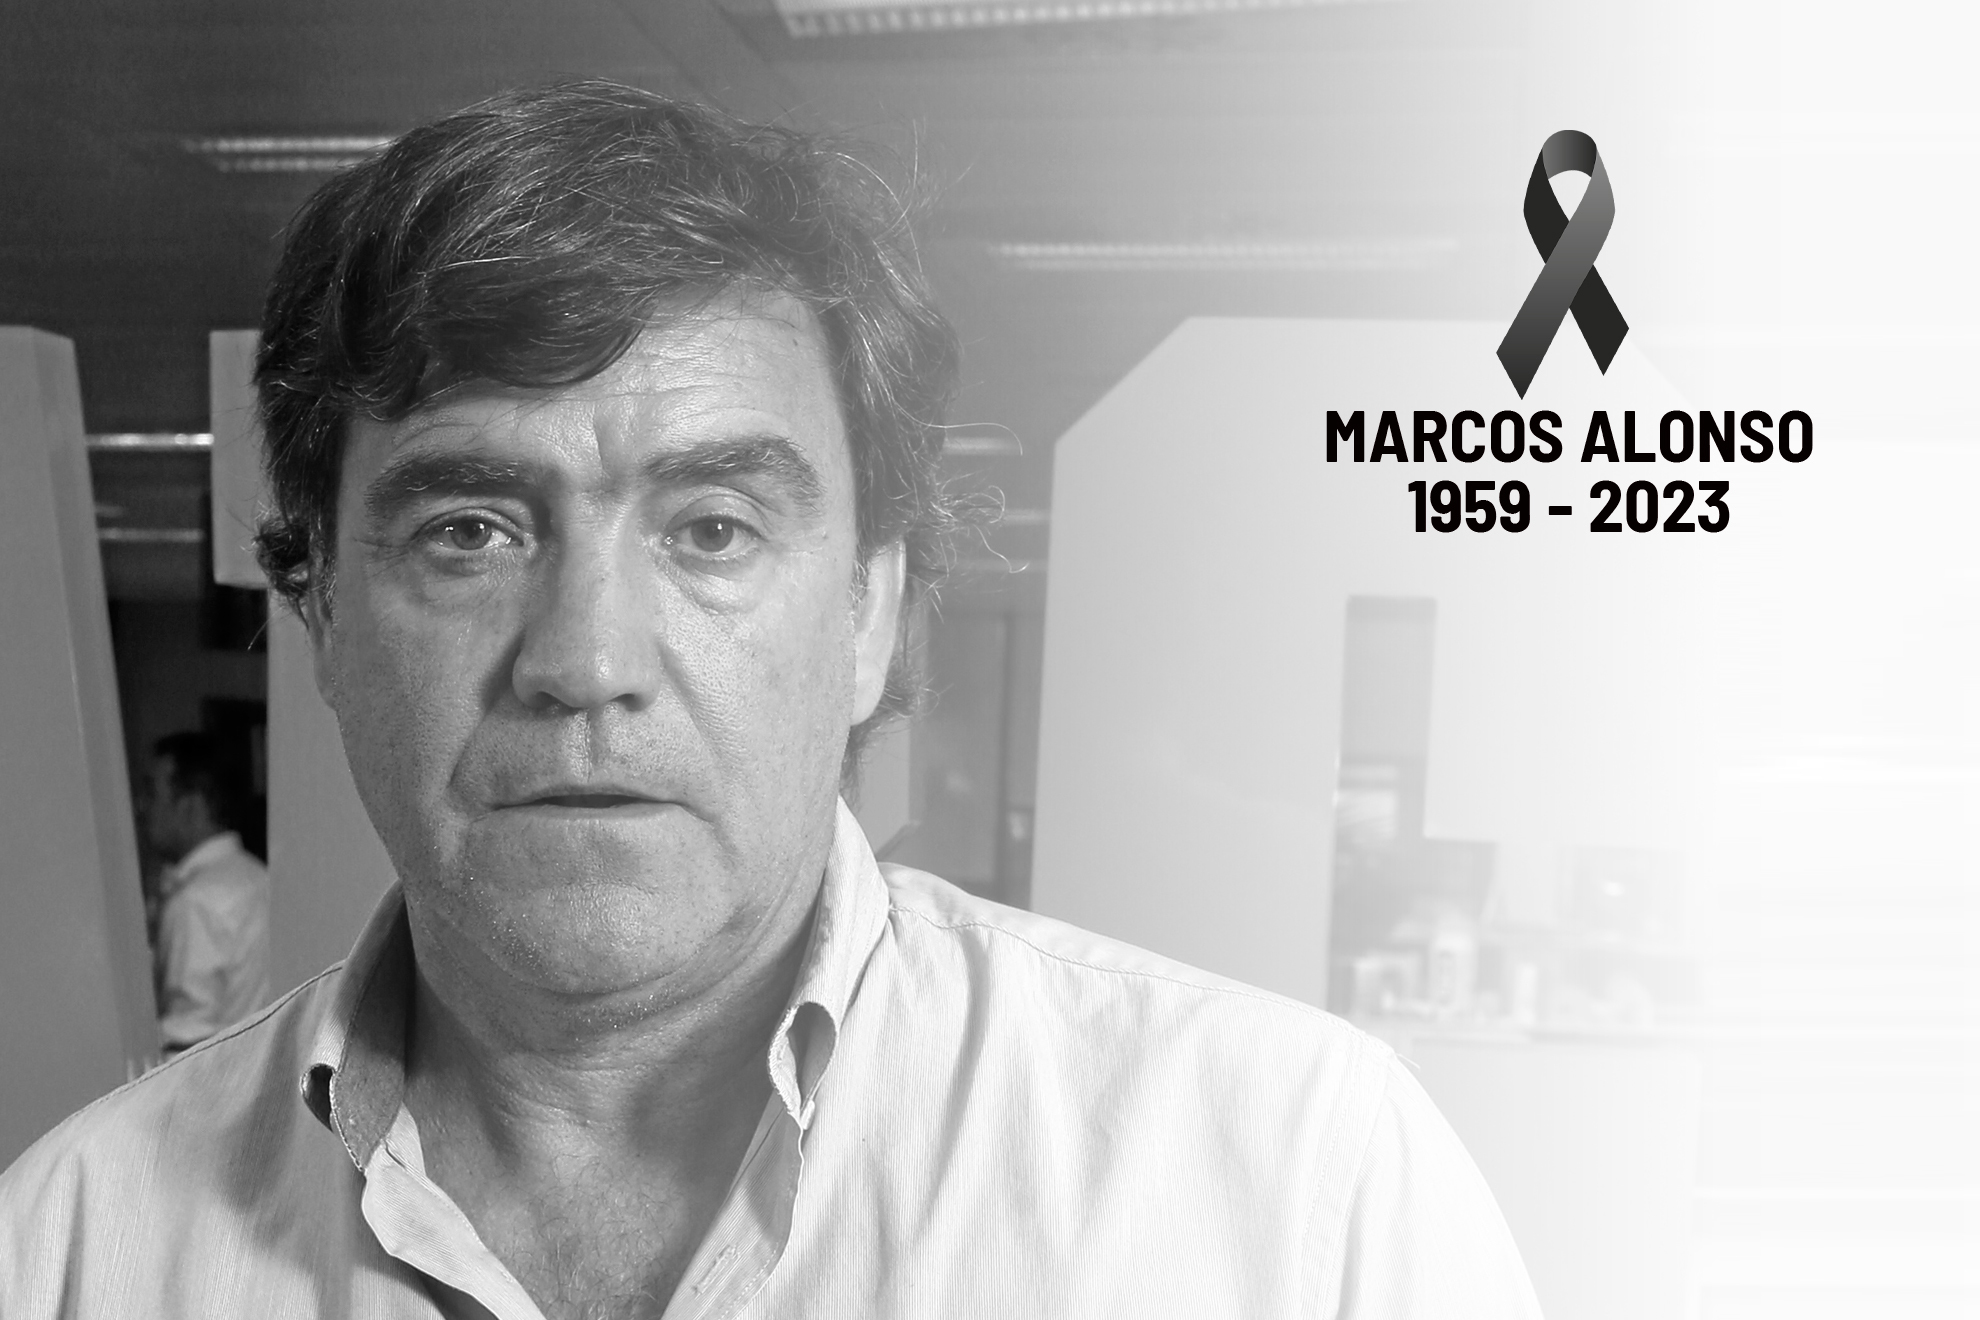 Muere Marcos Alonso